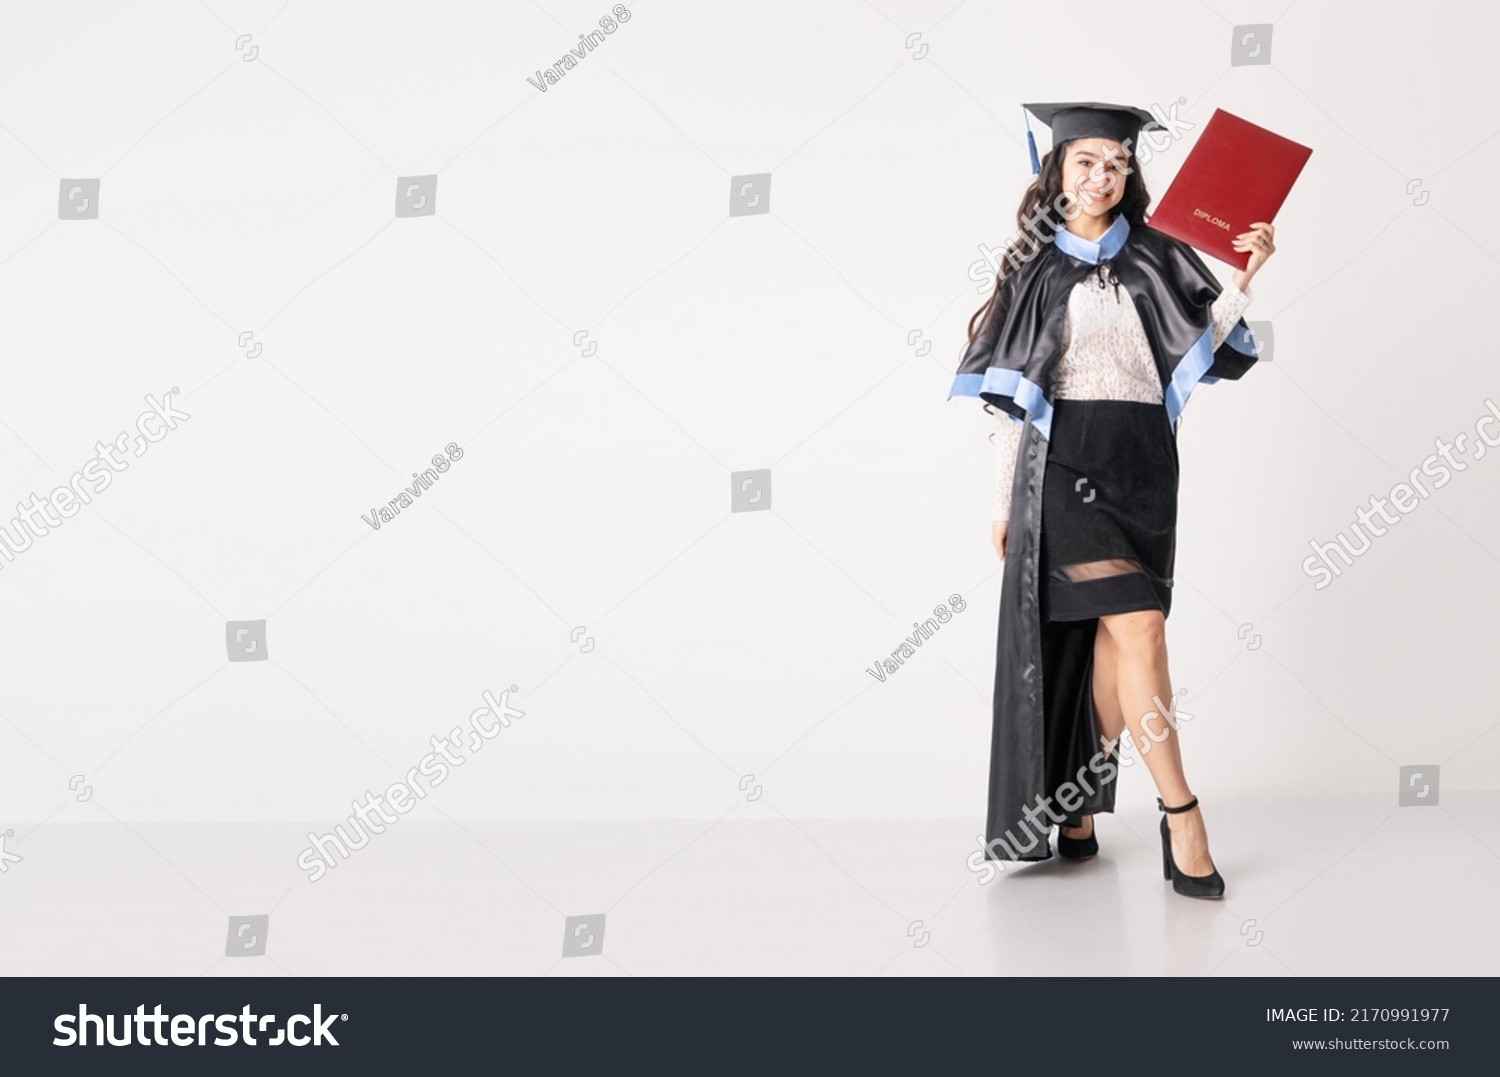 Woman student with diploma on white background with copy space. University graduate indian race woman wearing academic regalia and holding red diploma. #2170991977